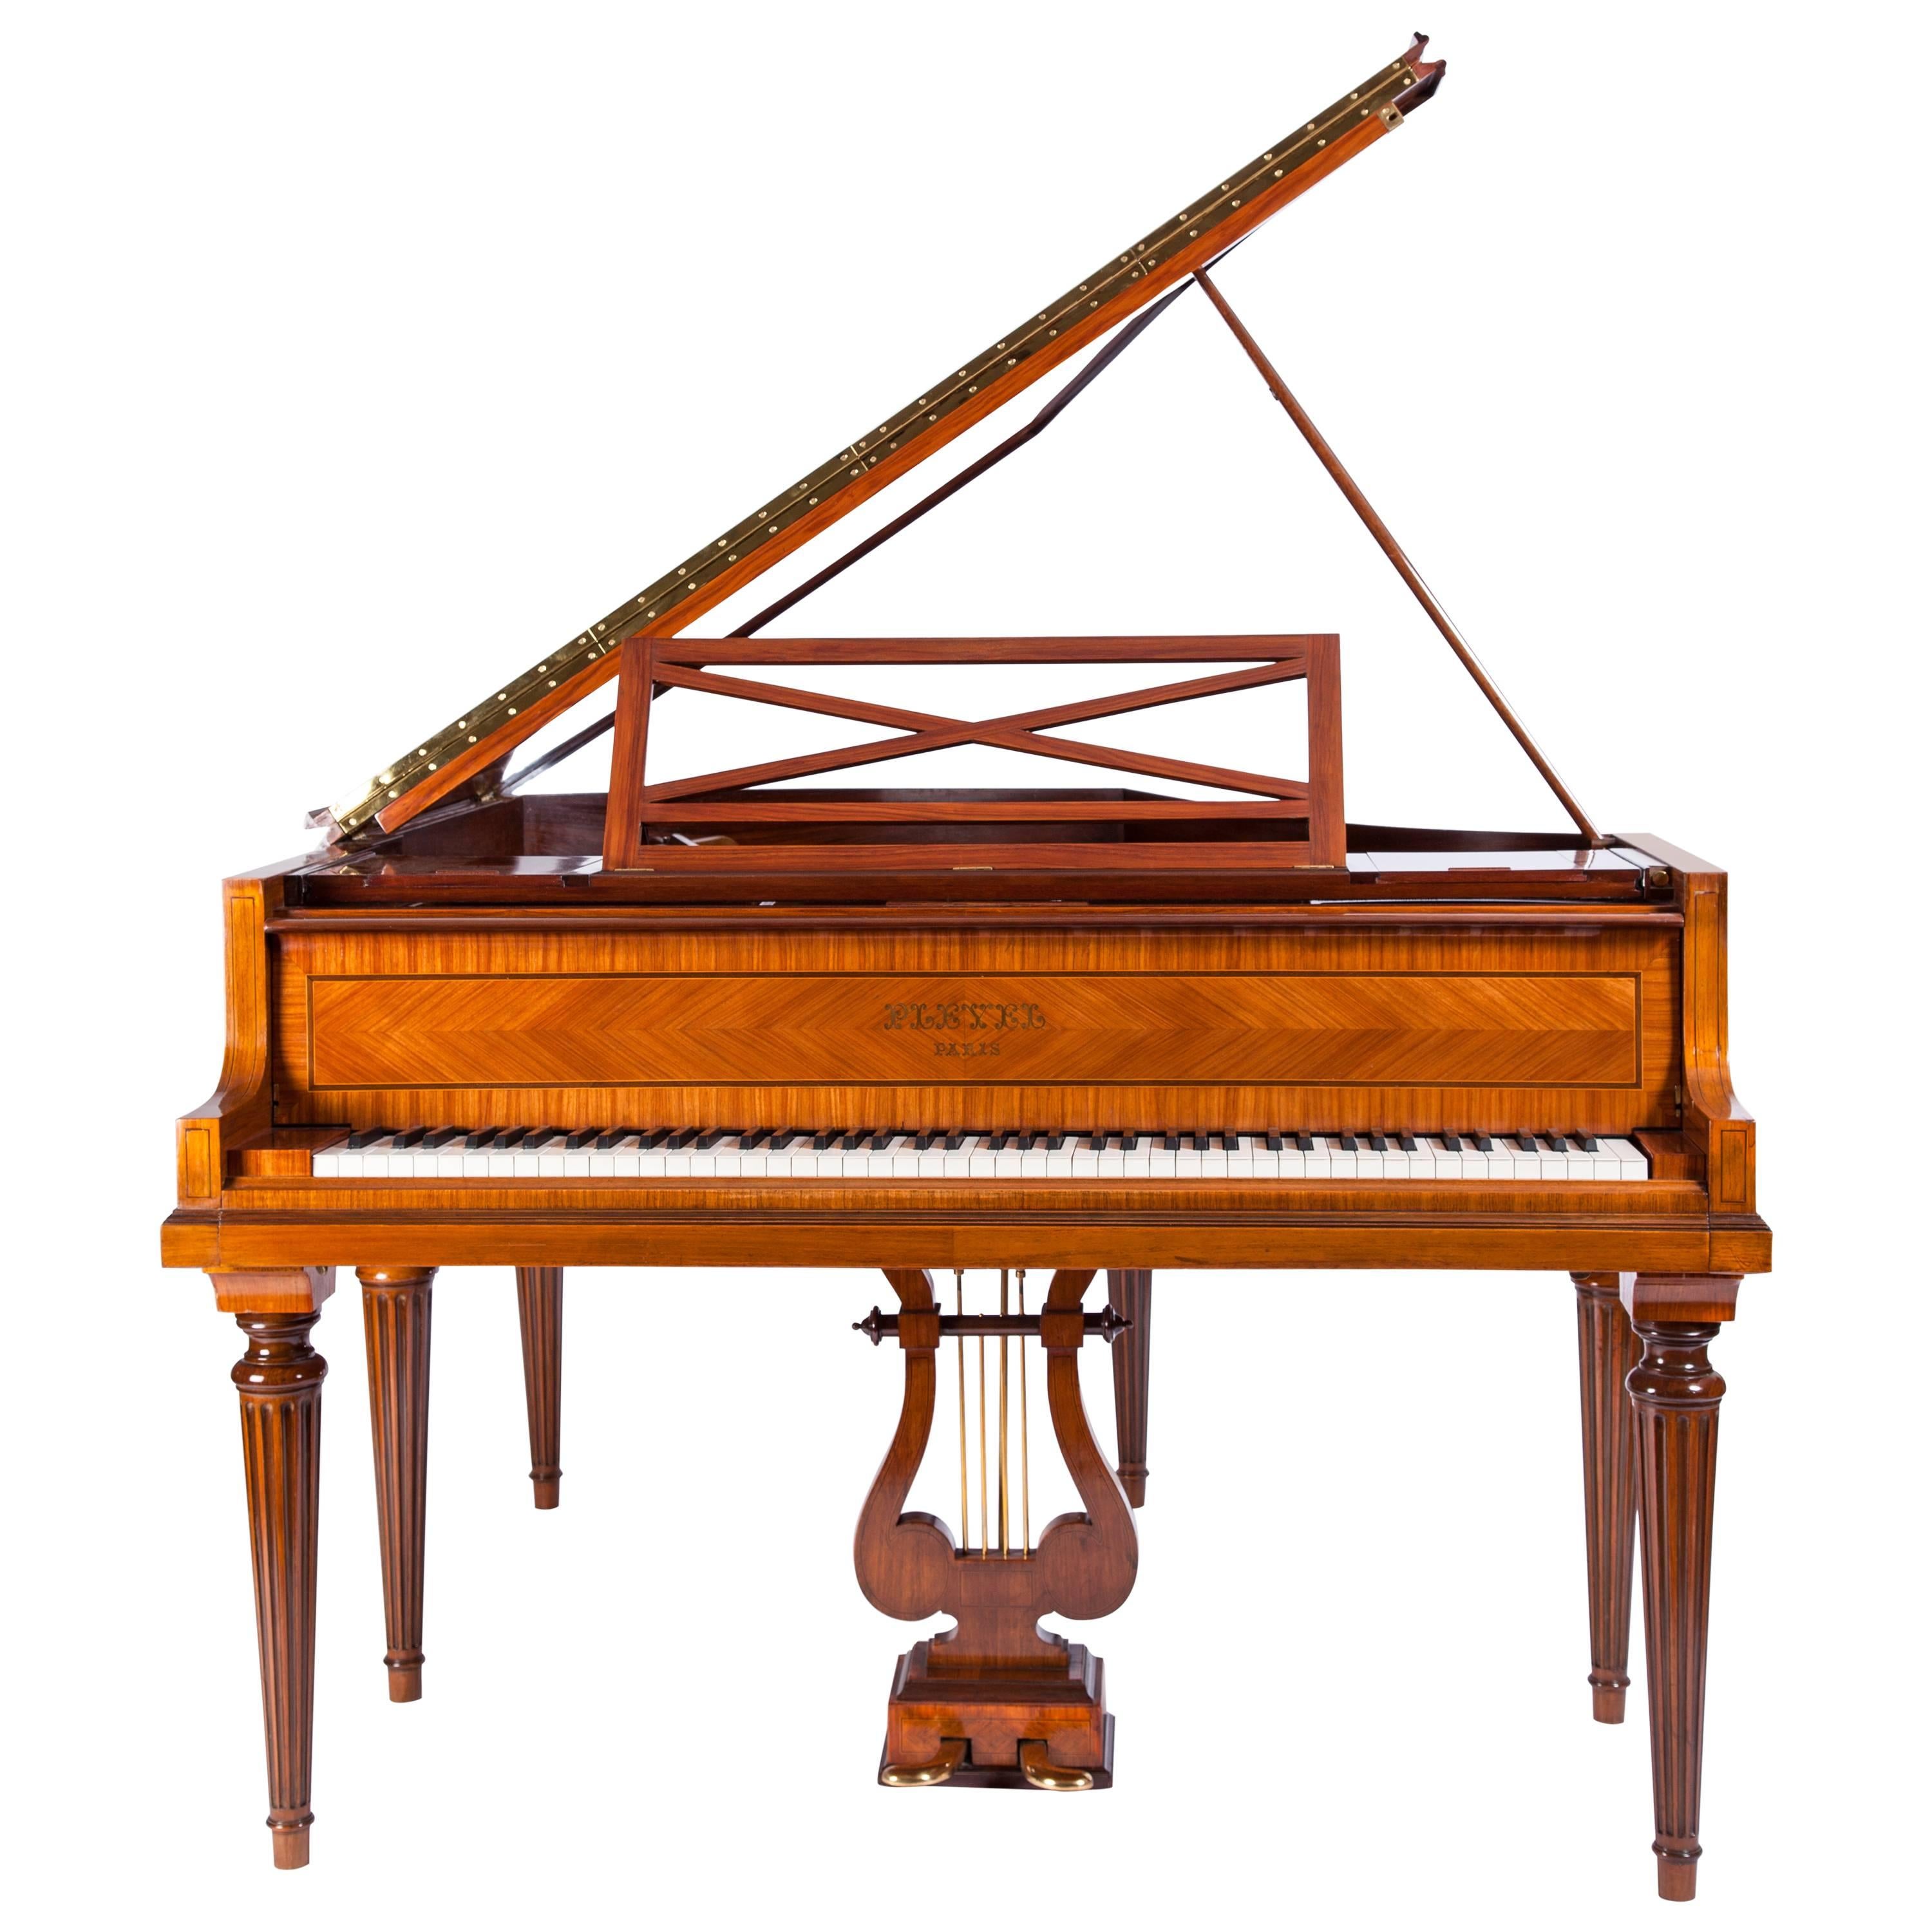 Pleyel Grand Piano "Gronkowski" on Six Fluted Legs Richly Inlaid Shellack Finish For Sale